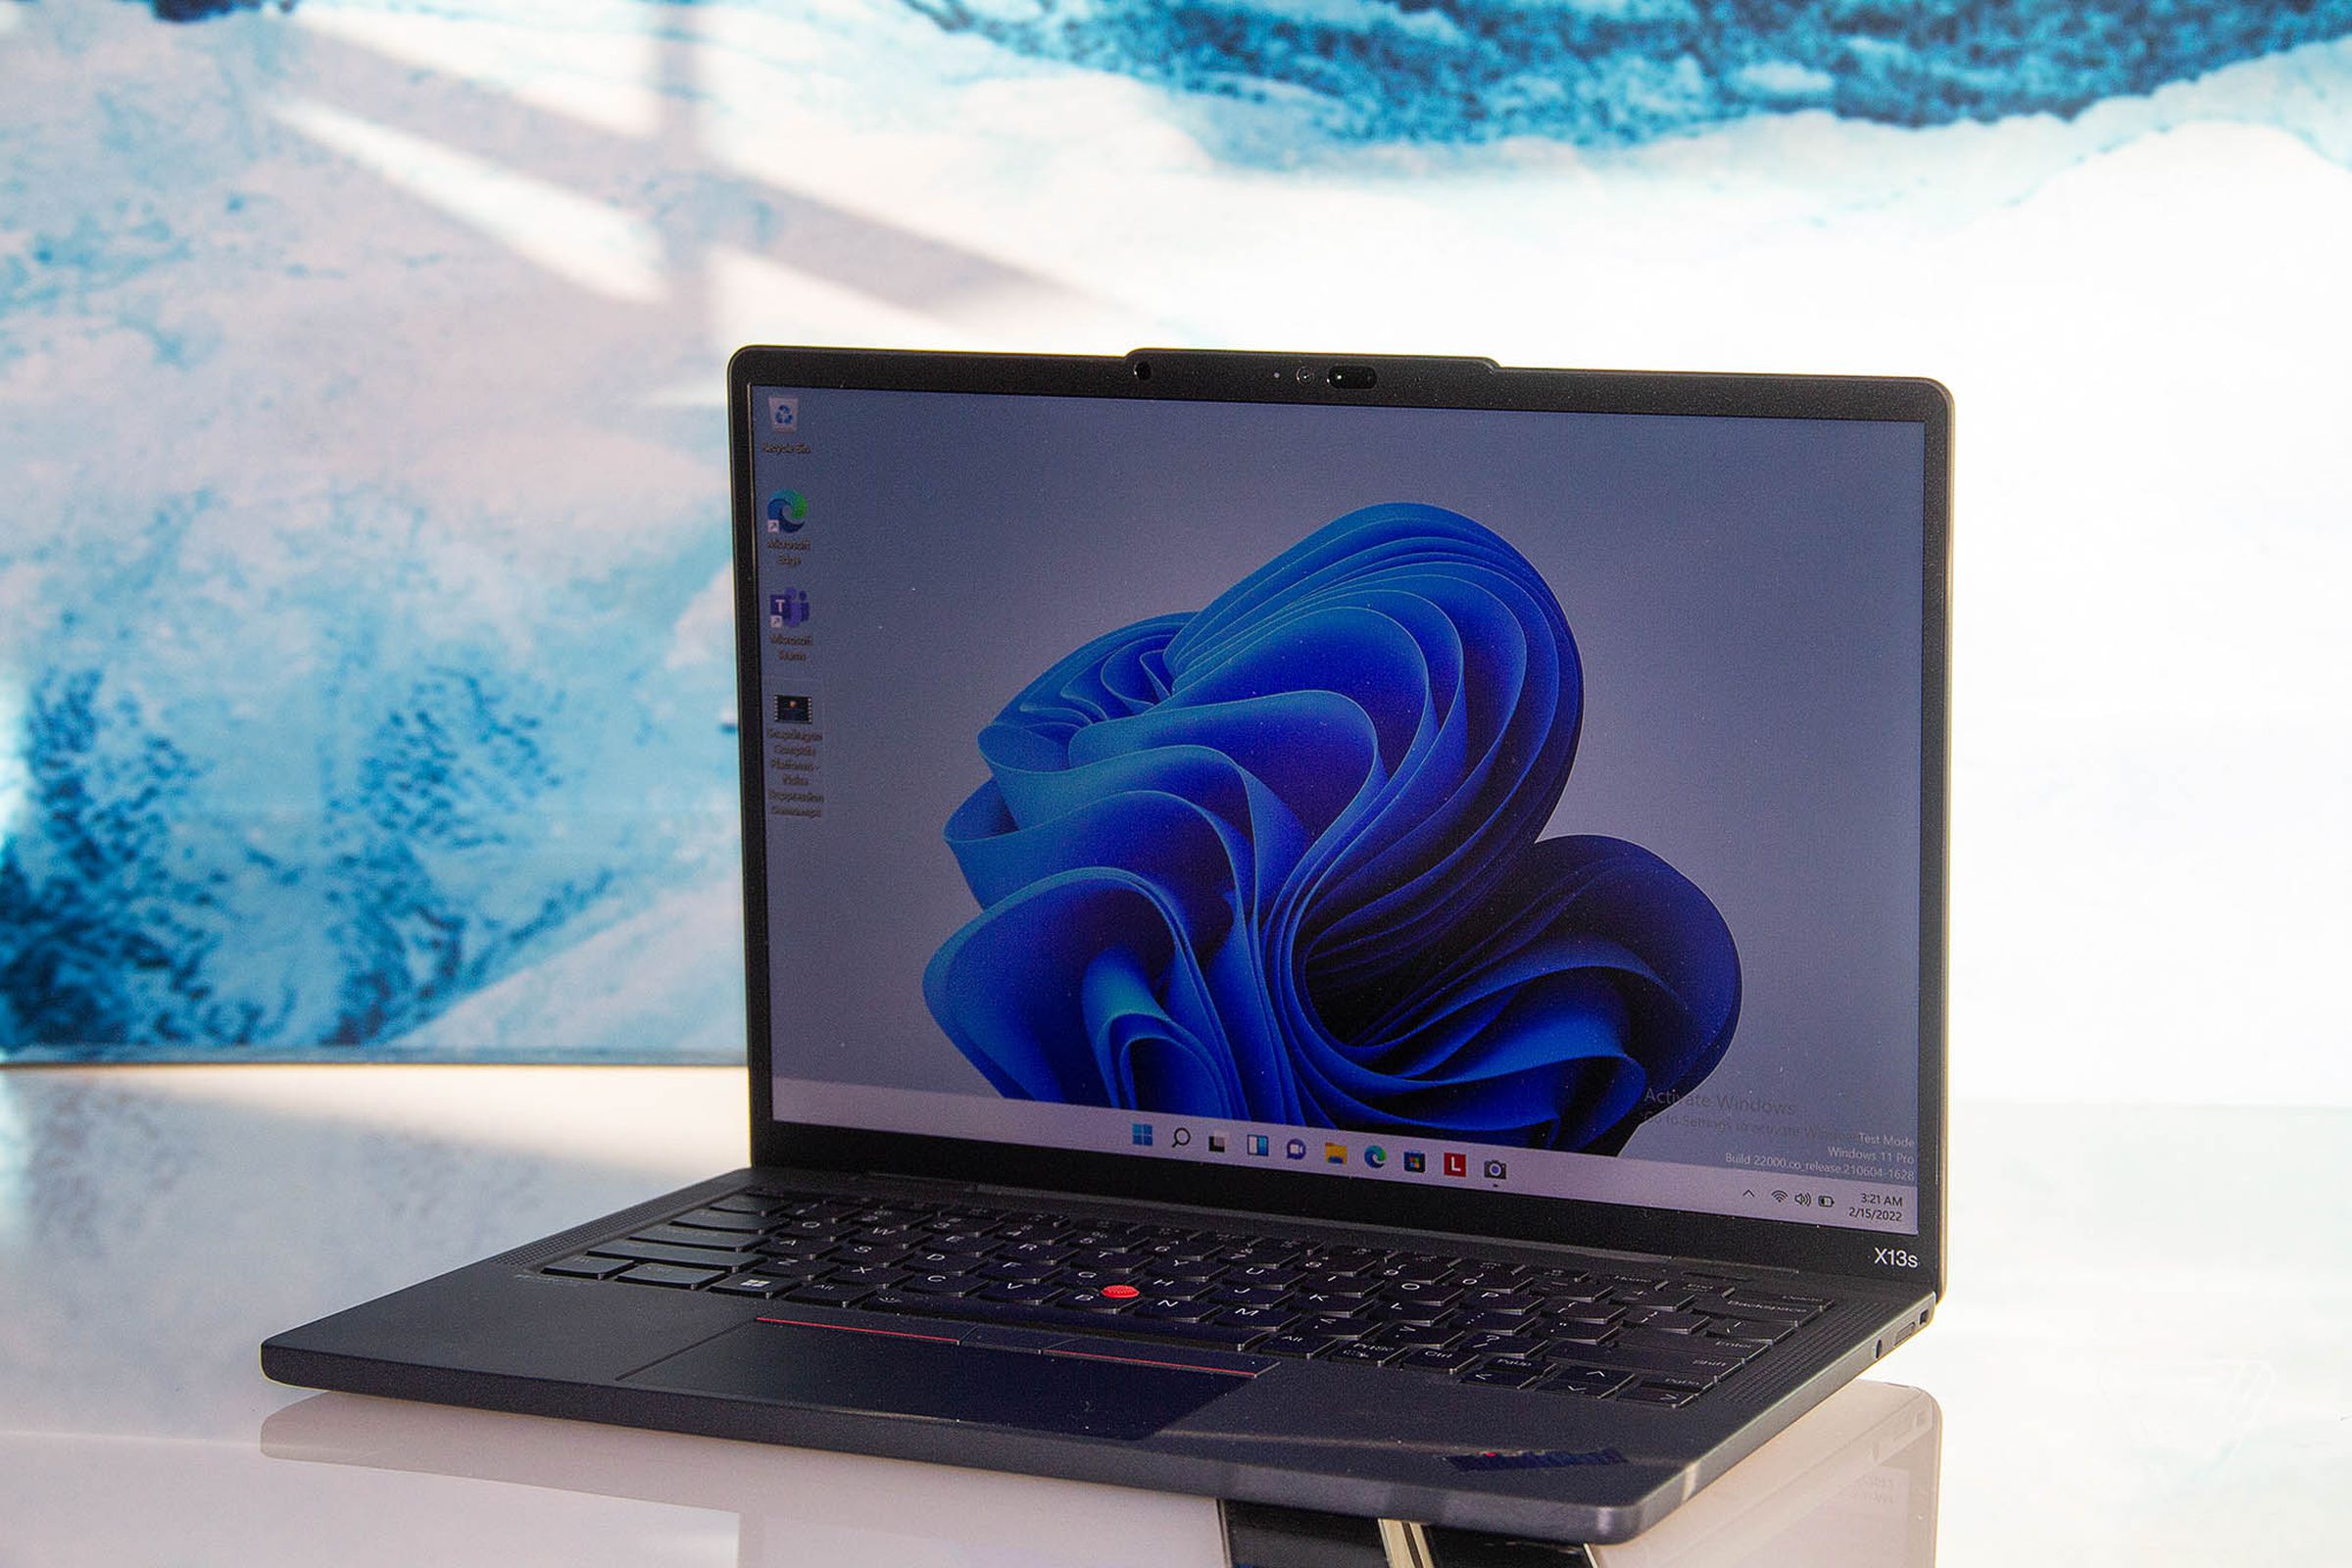 The Lenovo ThinkPad X13s open on a white table angled to the left. The screen displays a blue ribbon pattern on a light blue background.